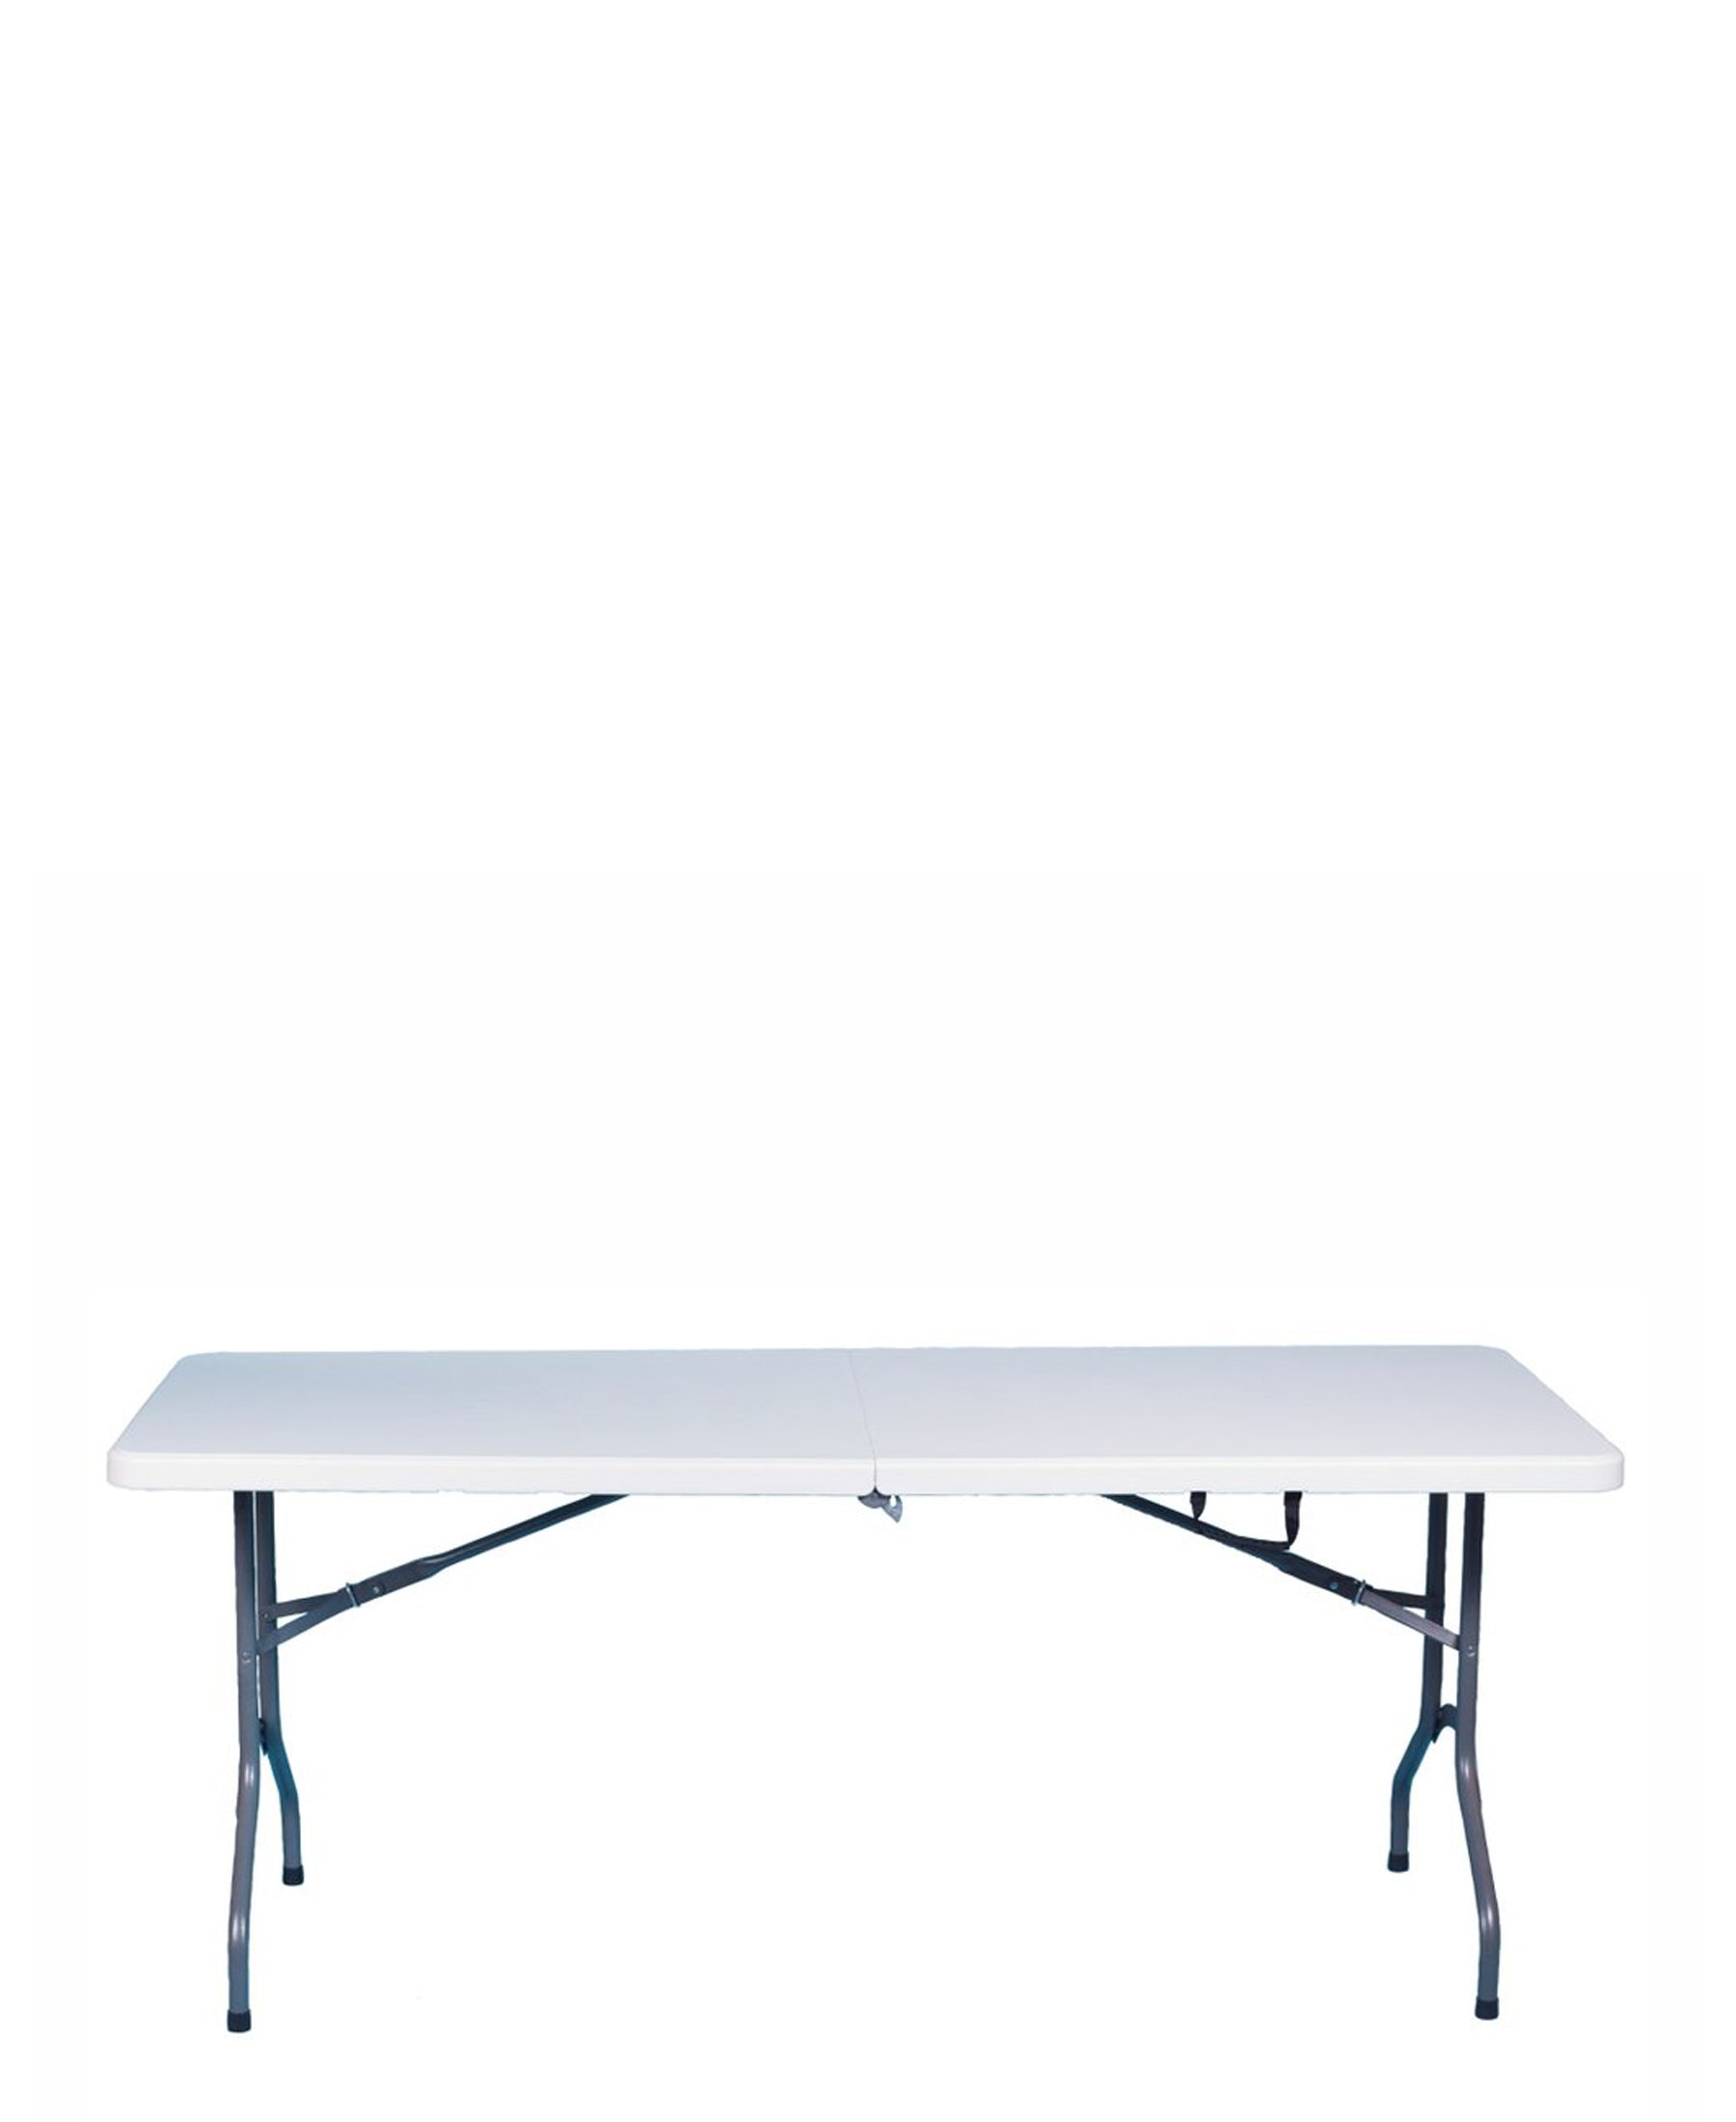 Totai 17/003 6 Plastic Table With Carry Handle - White